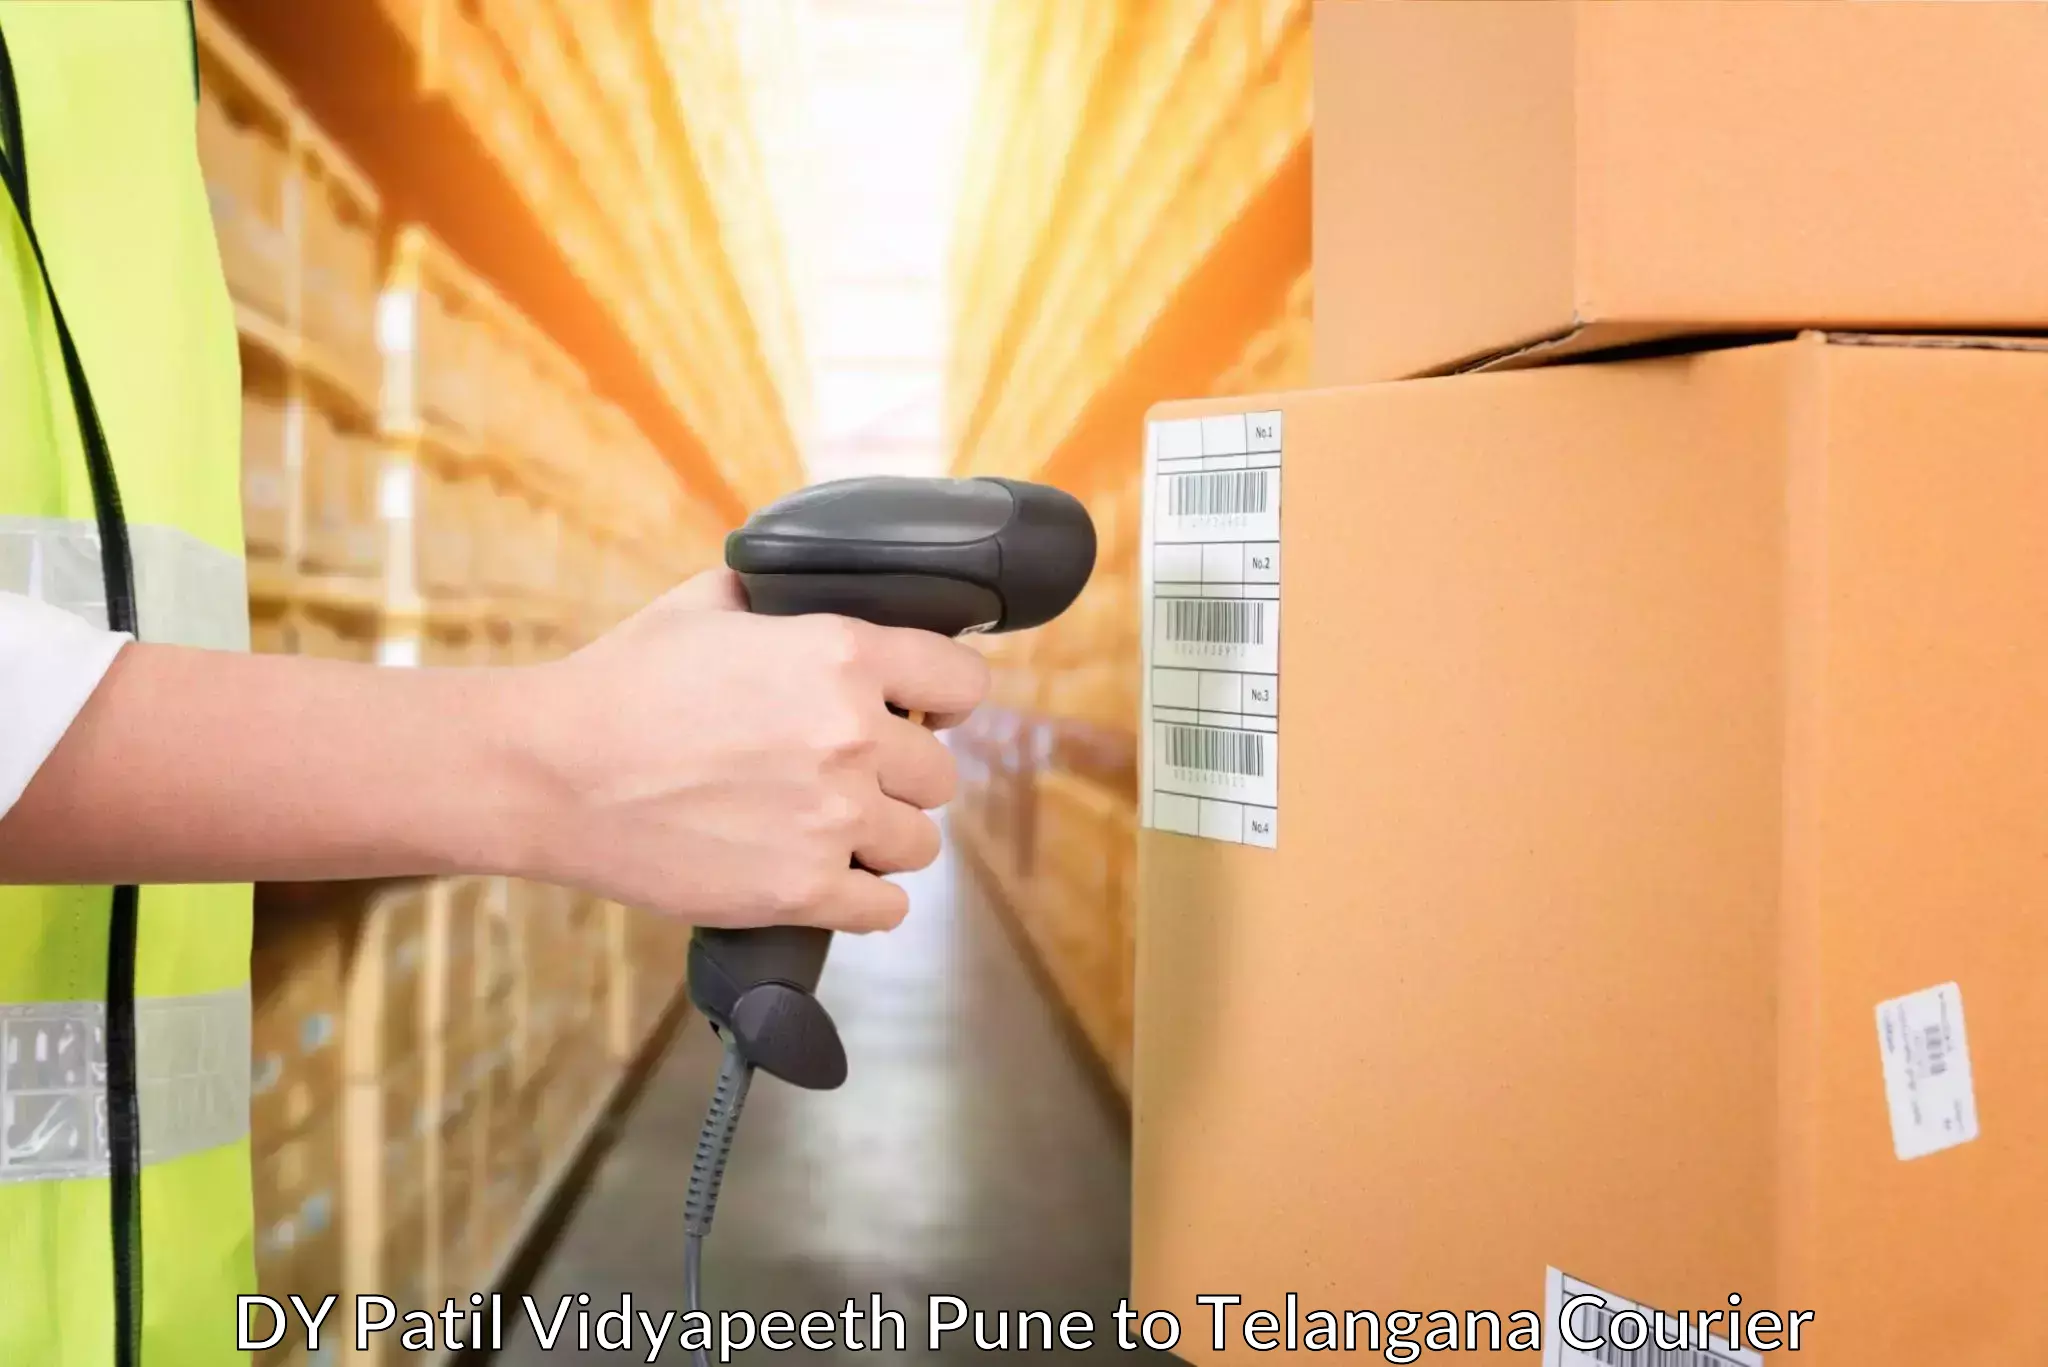 24/7 courier service DY Patil Vidyapeeth Pune to Bhadrachalam